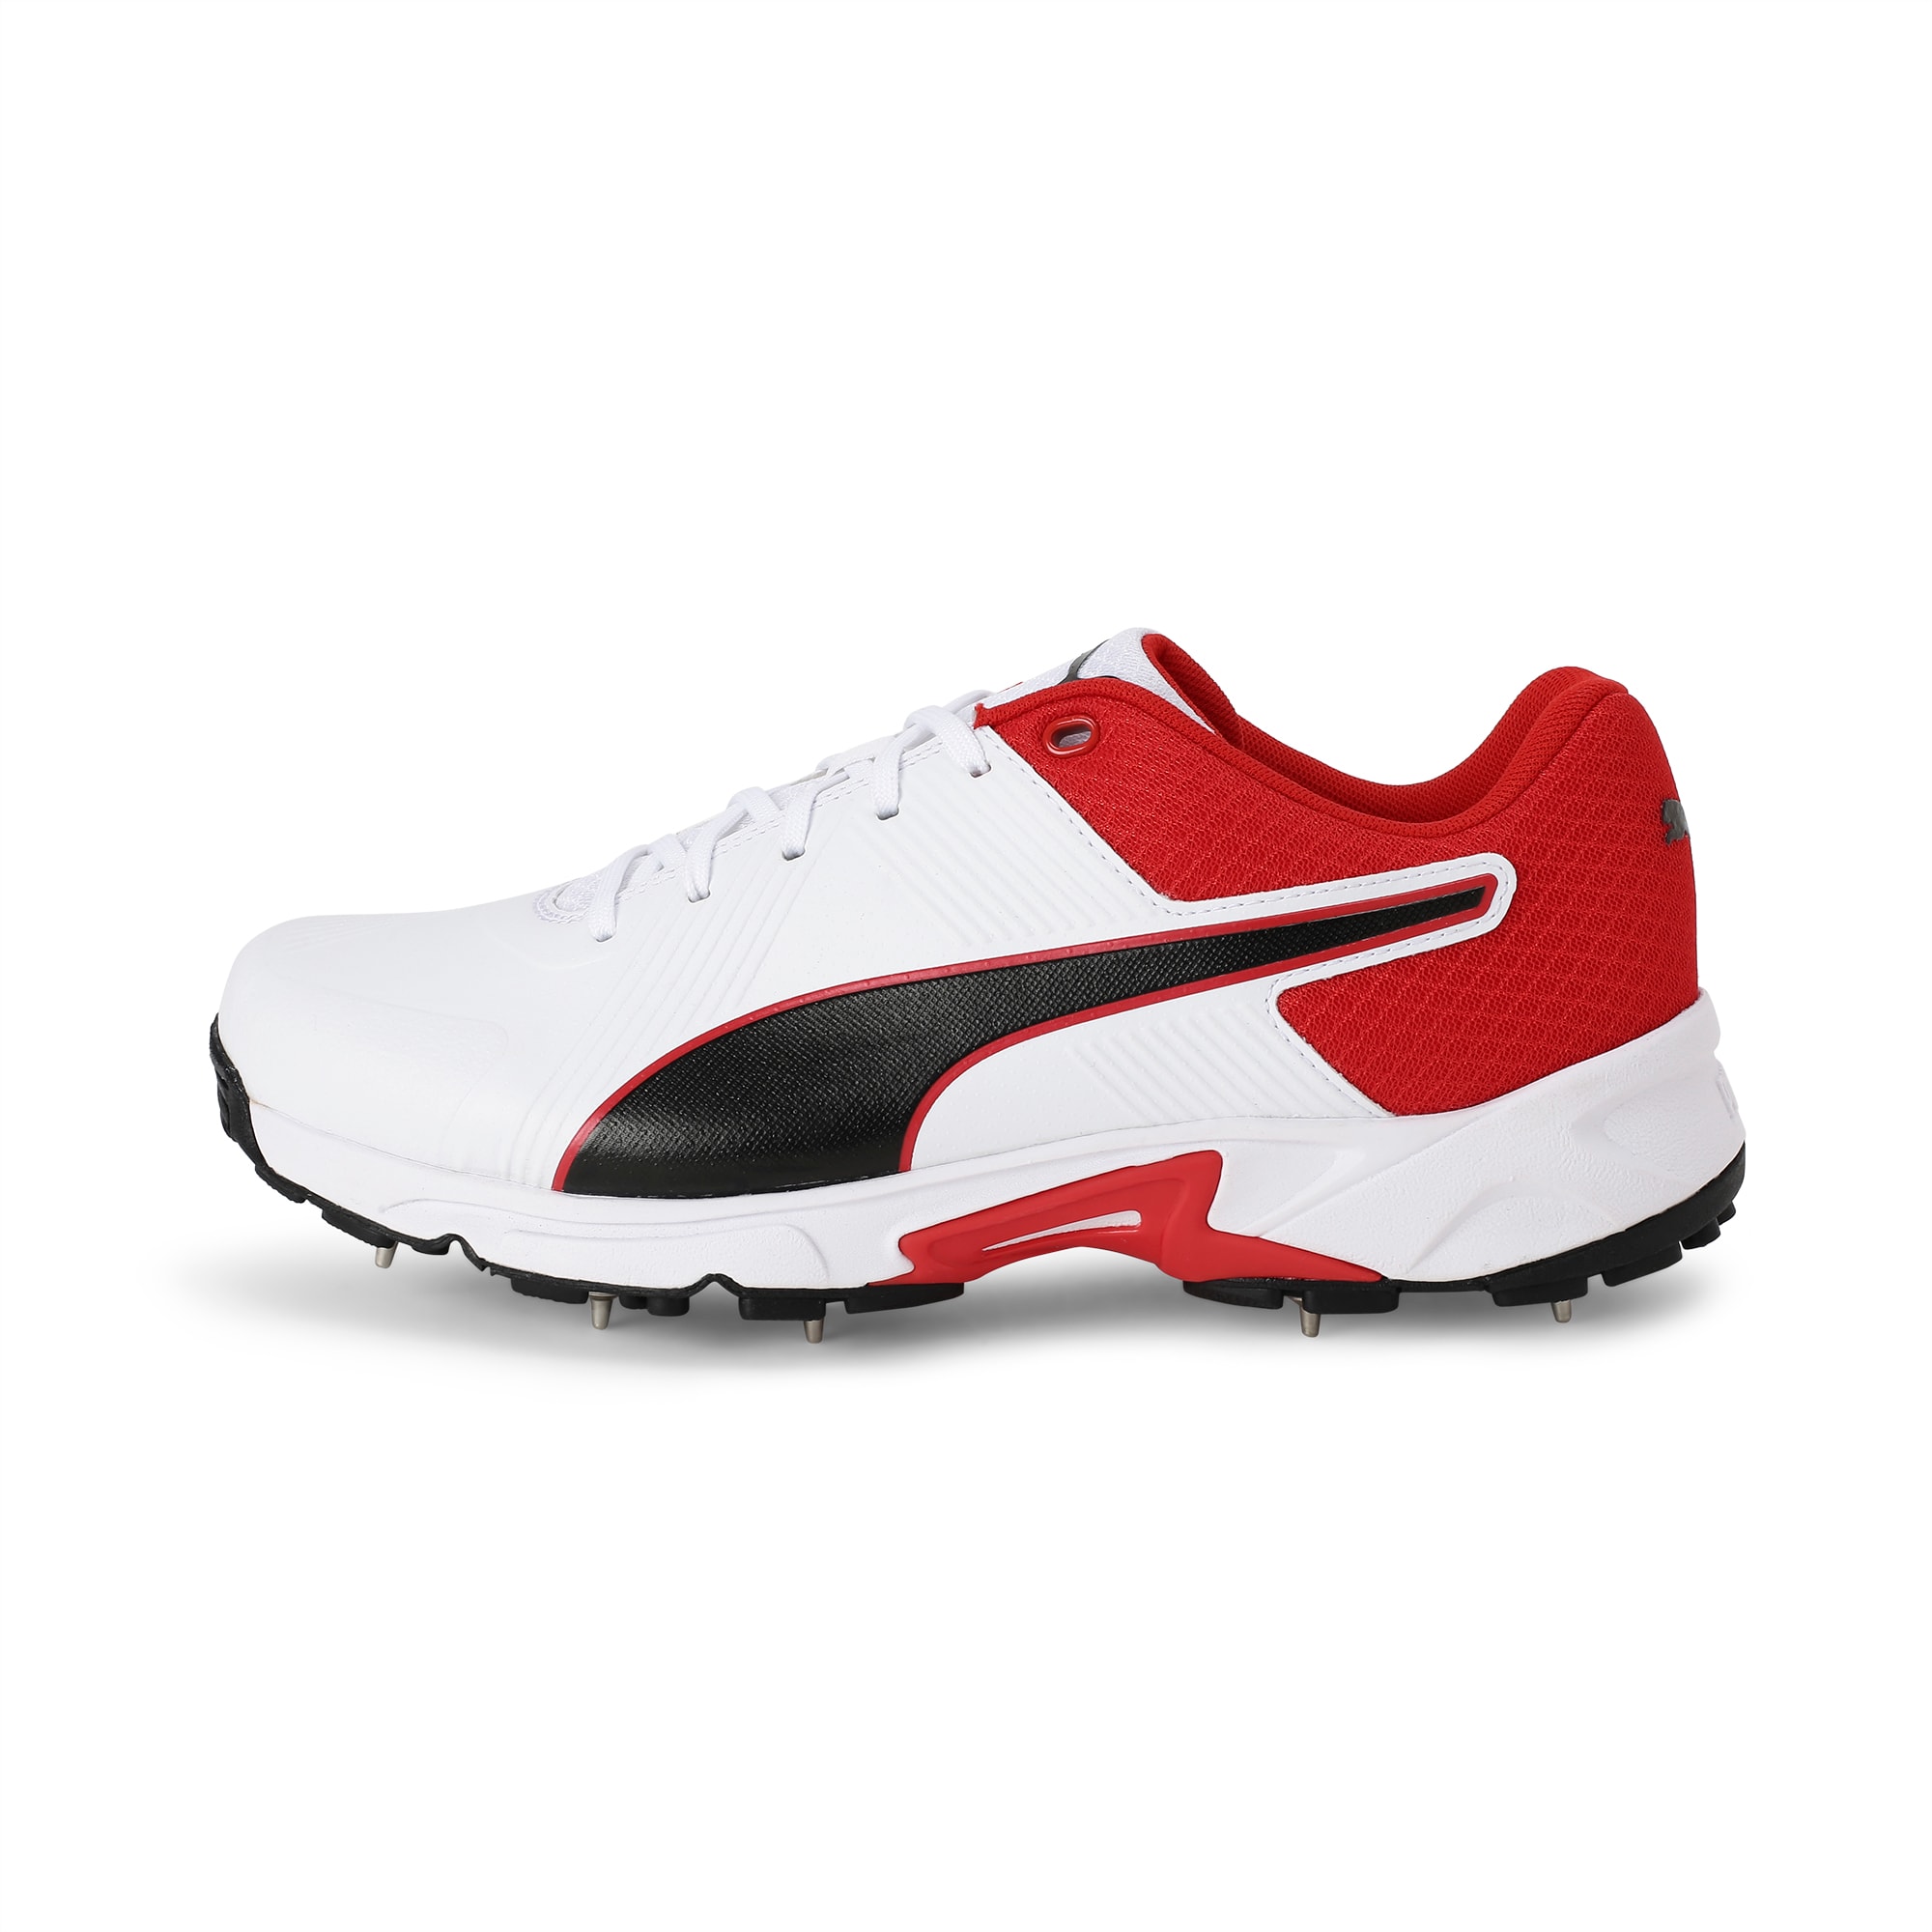 puma spike shoes for running